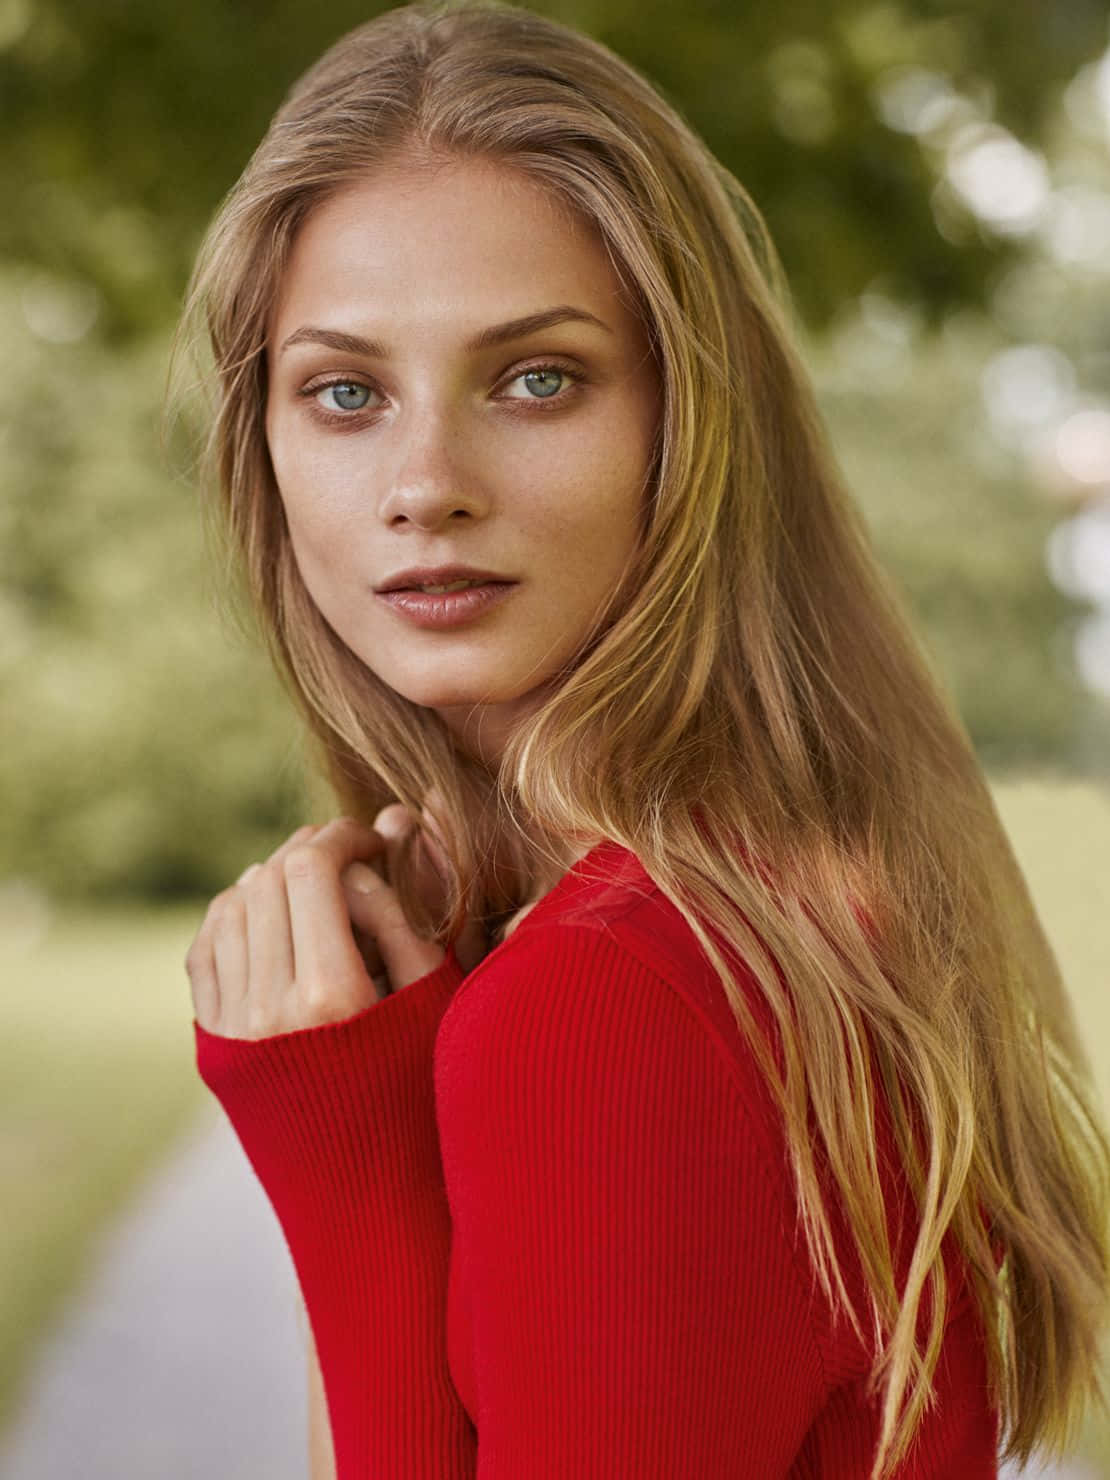 Anna Selezneva Posing In A Casual Outfit During A Photoshoot Wallpaper